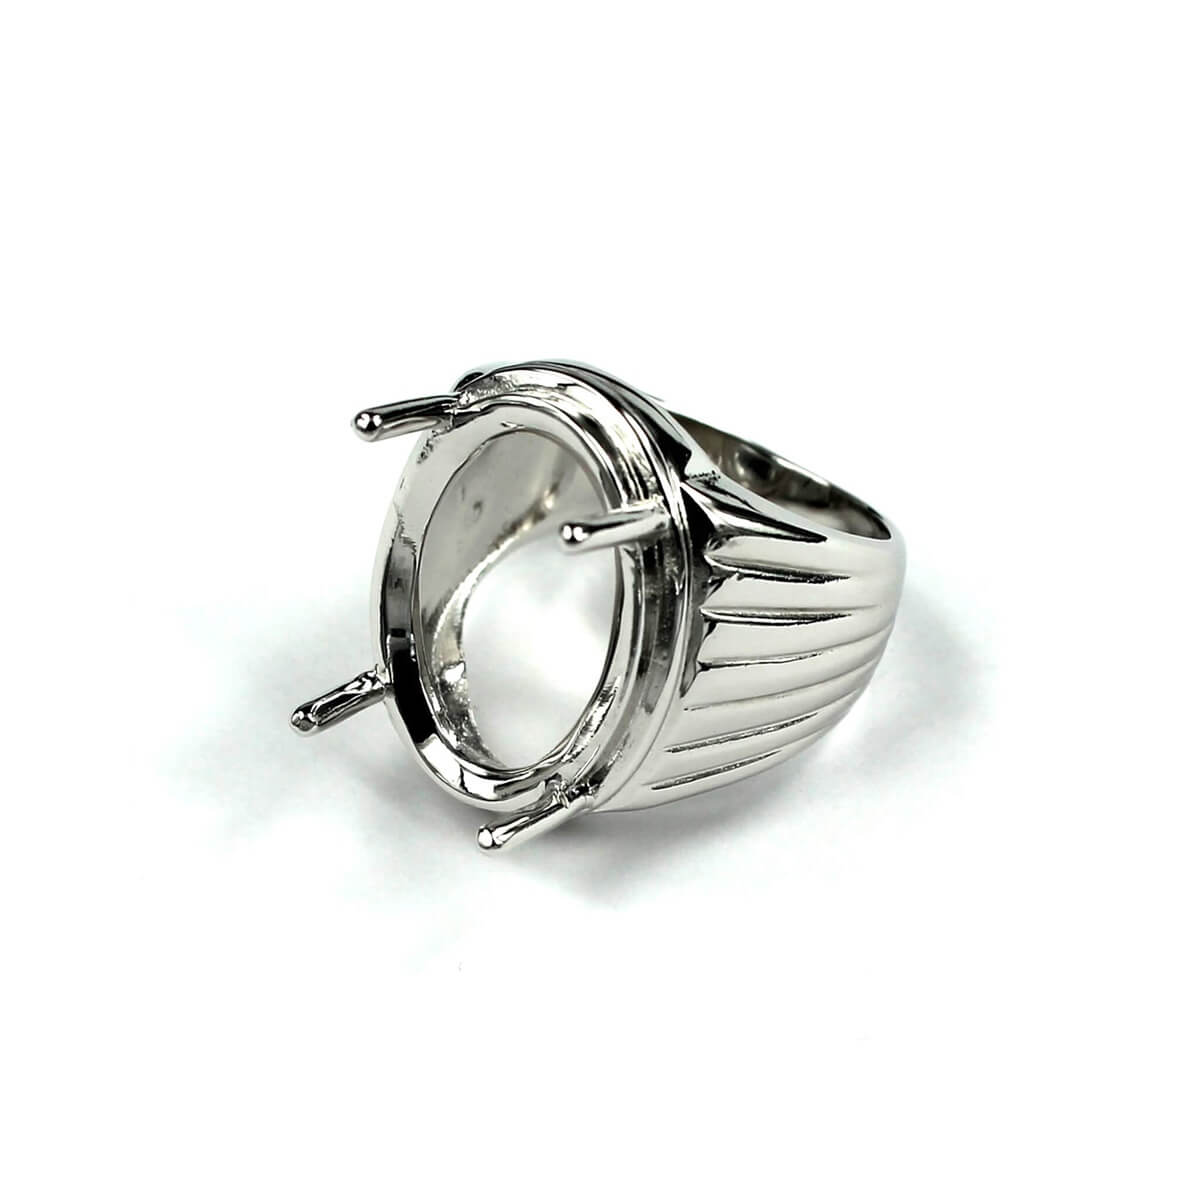 Patterned Ring with Oval Prongs Mounting in Sterling Silver 